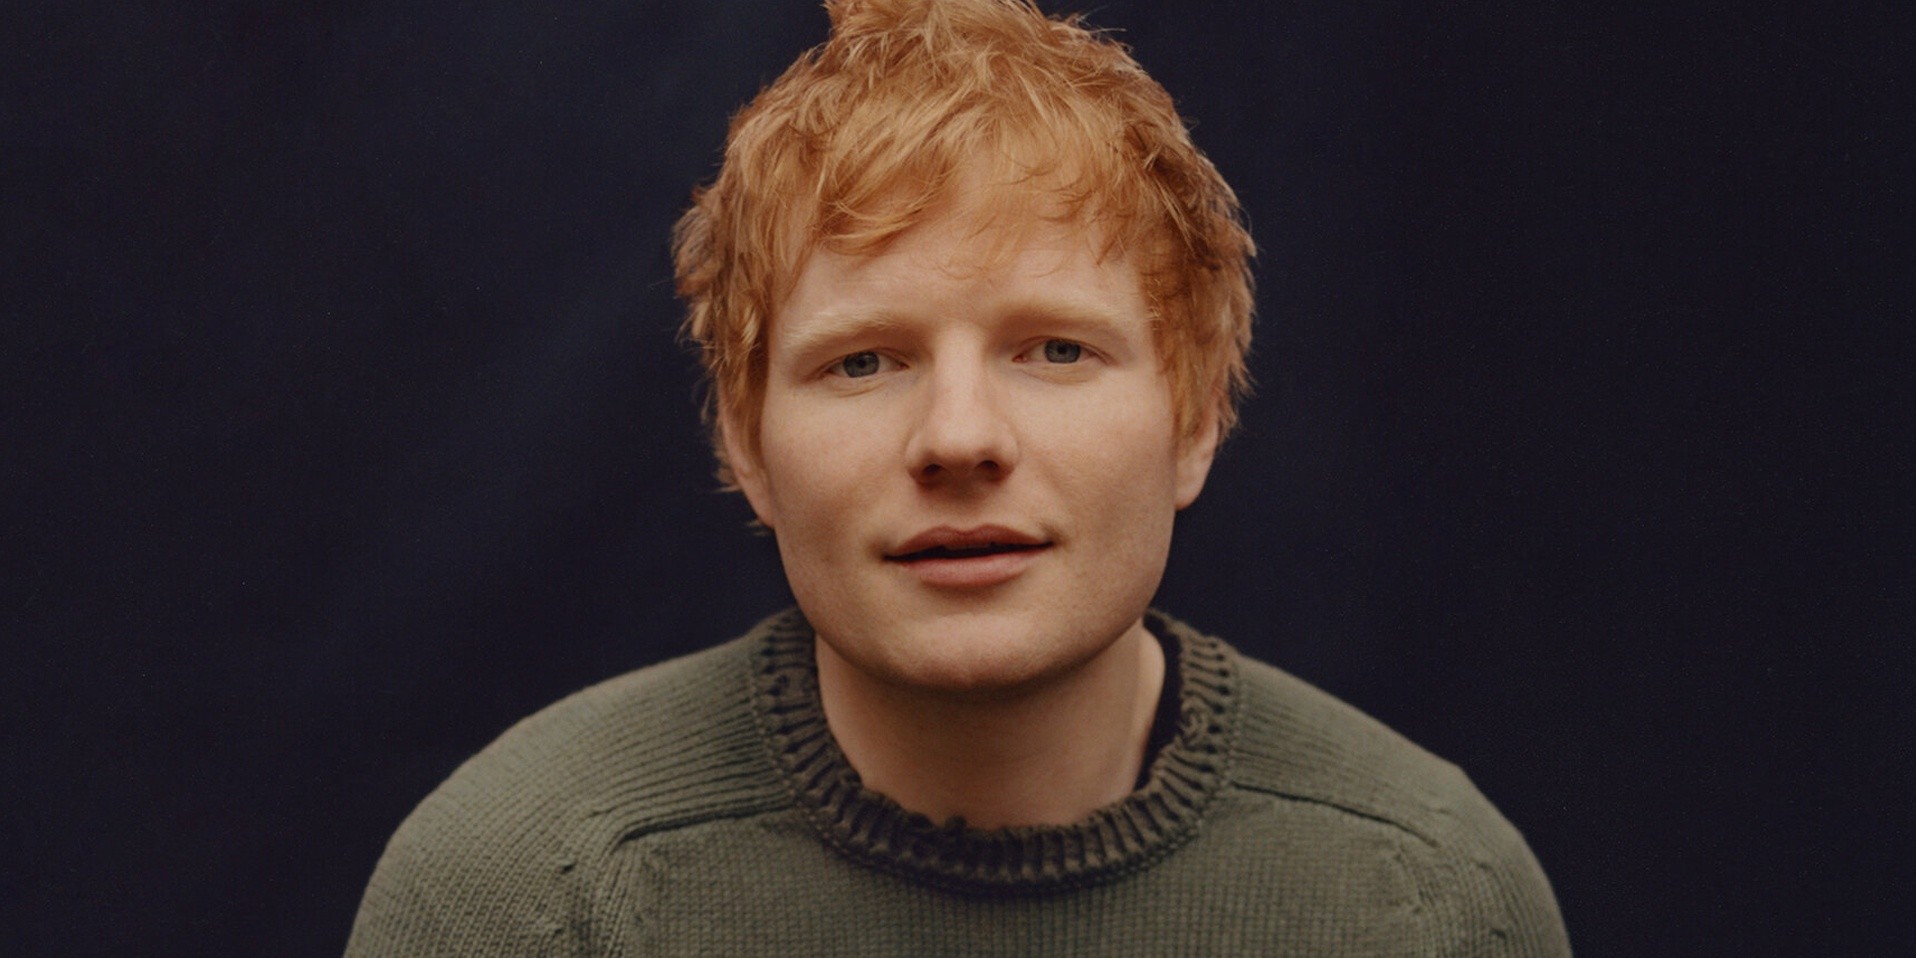 Here’s how you can watch Ed Sheeran's special performance on Philippine TV this weekend